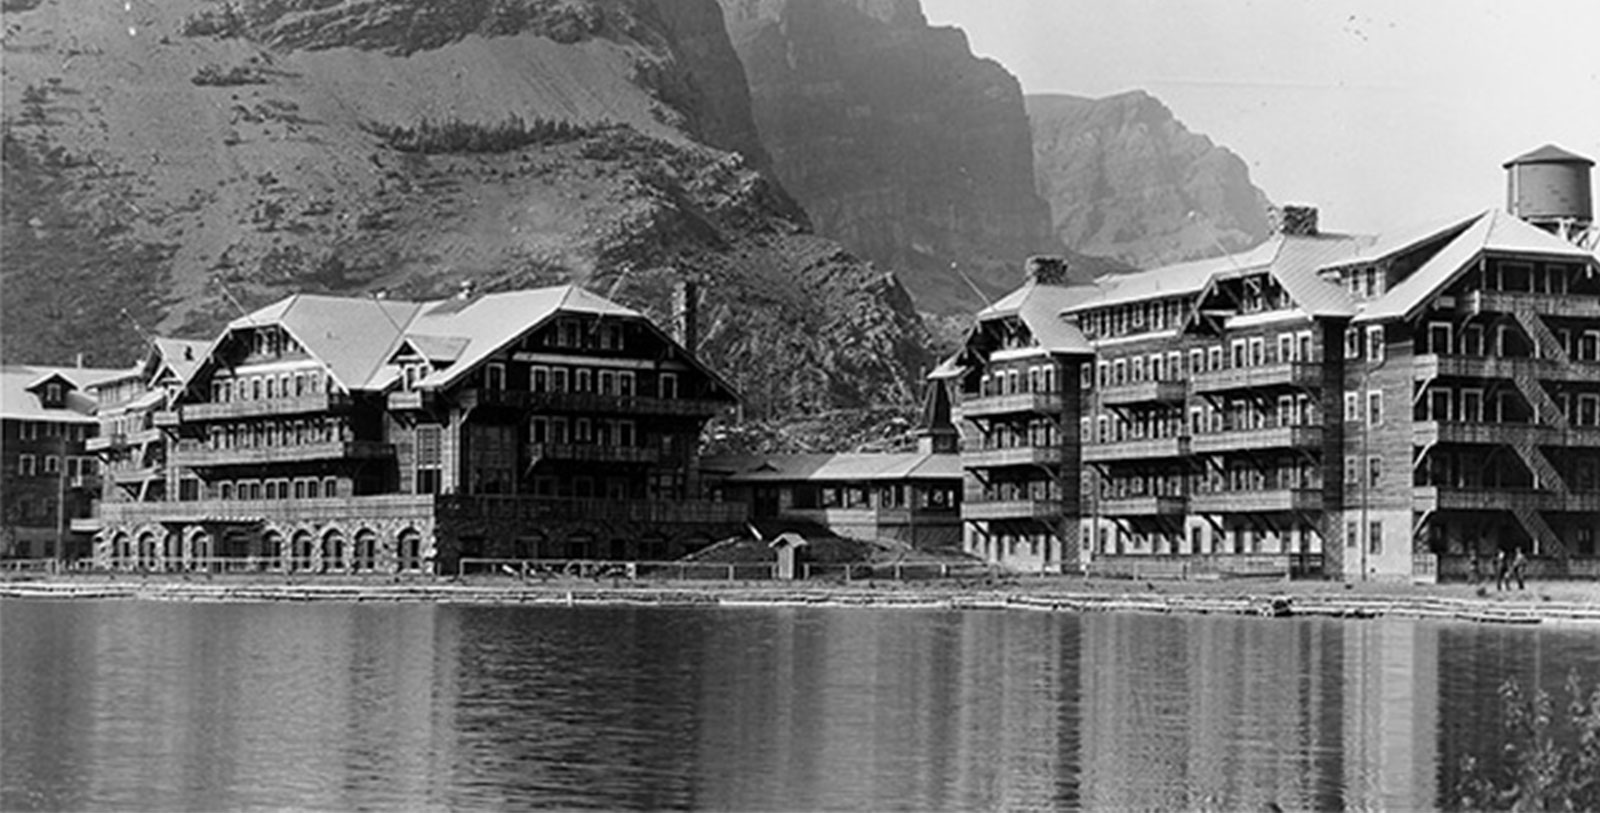 Image of Boat on Switfcurrent Lake, Many Glacier Hotel in Babb. Montana, 1915, Member of Historic Hotels of America, Discover